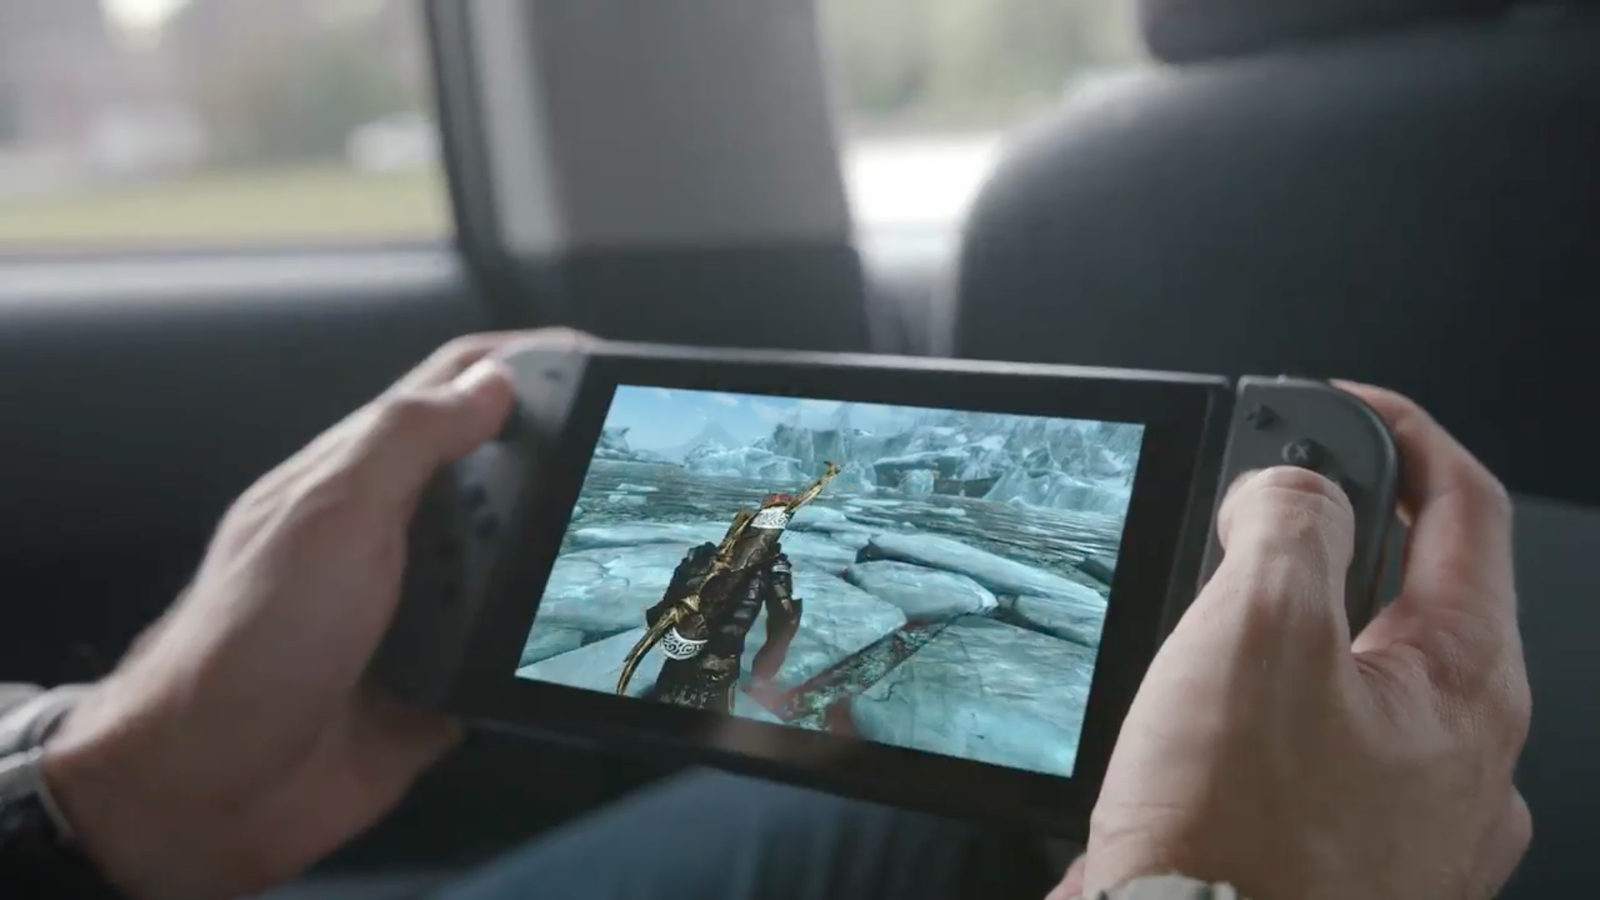 Nintendo Switch -- The Gaming Console All set for Launch on March 3rd at $300